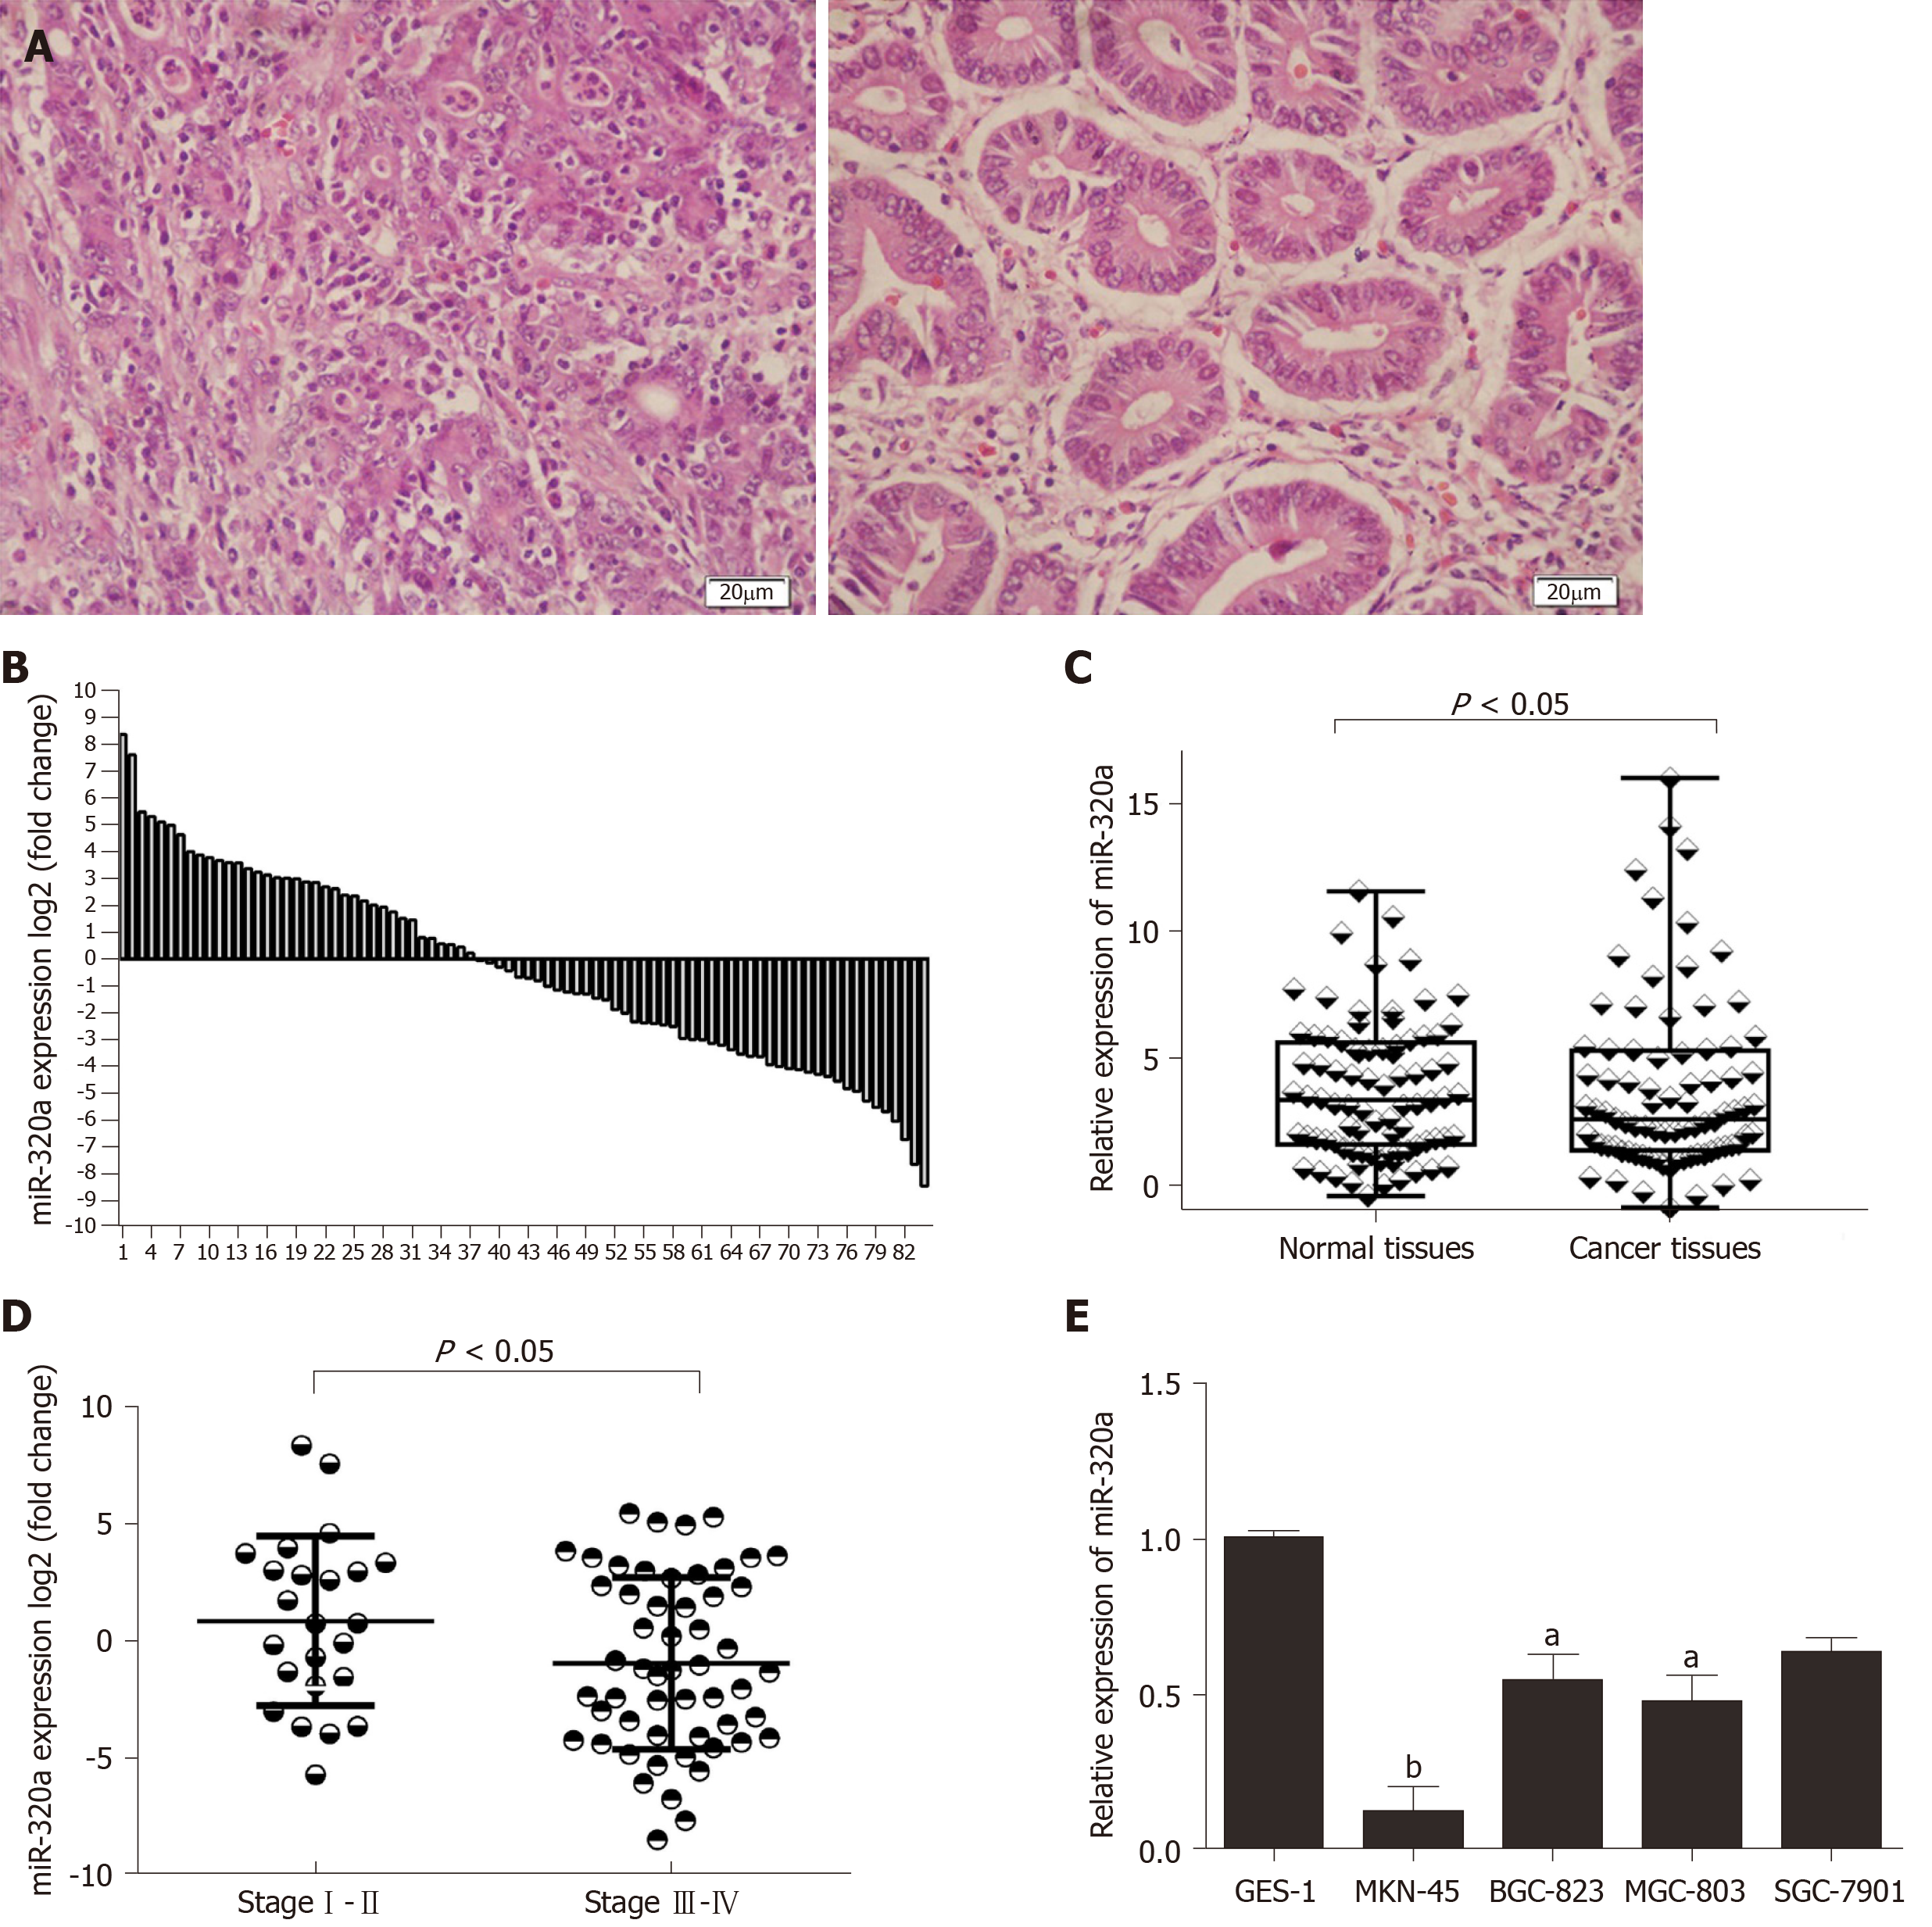 Microrna 3a Suppresses Tumor Progression By Targeting Pbx3 In Gastric Cancer And Is Downregulated By Dna Methylation